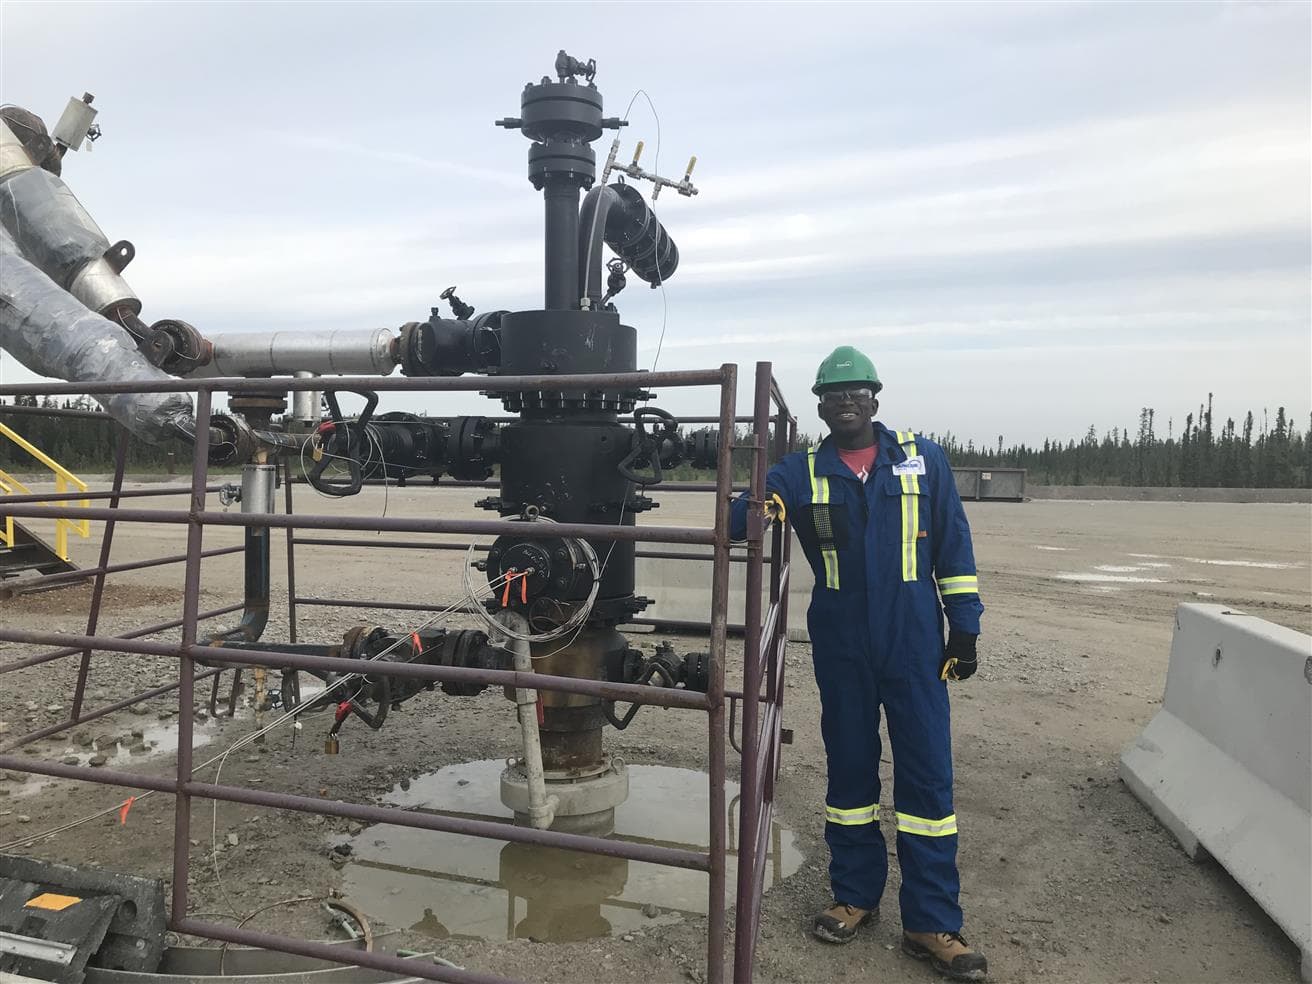 Kome Eto, Upstream production engineer at Suncor, smiles while standing next to a steam assisted gravity drainage (SAGD) well site, at Suncor’s Firebag in situ operations